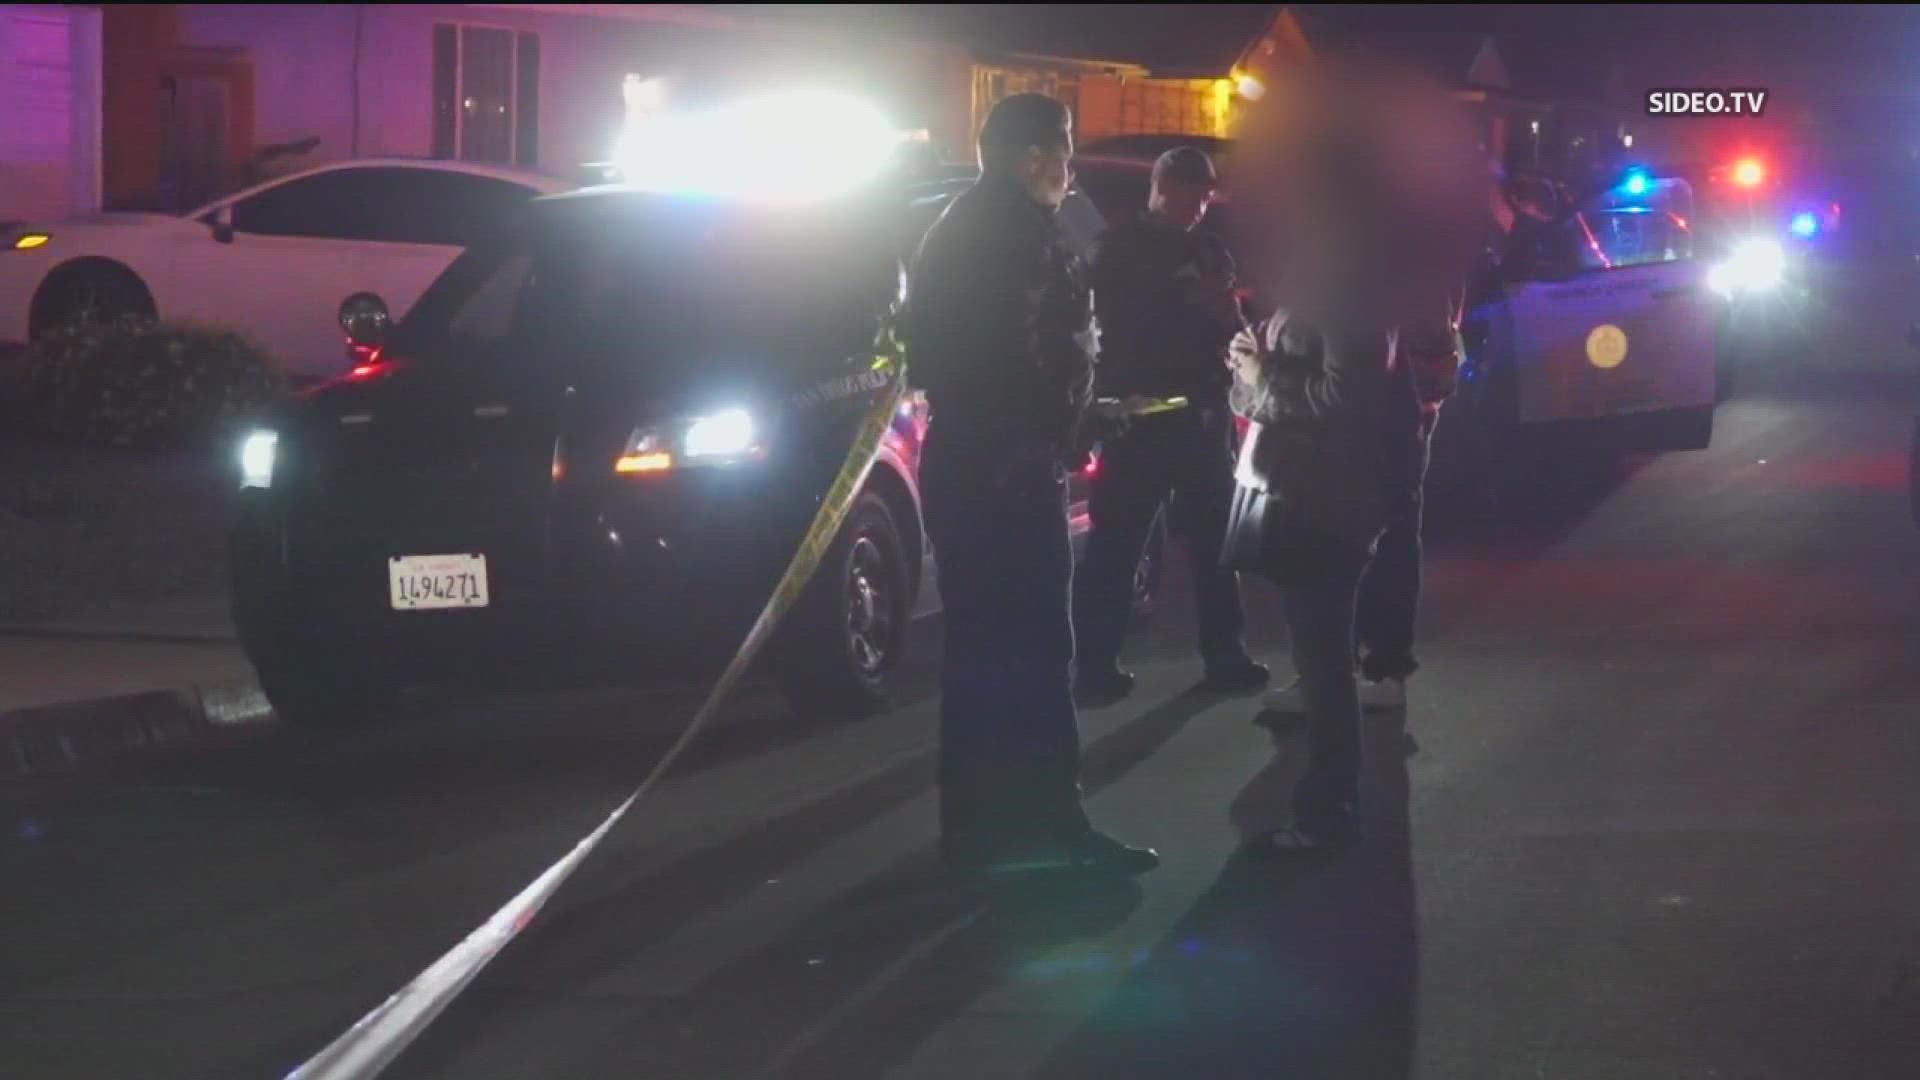 This shooting marked the third major crime in the last two months following a house party in the South Bay involving persons under the age of 18.